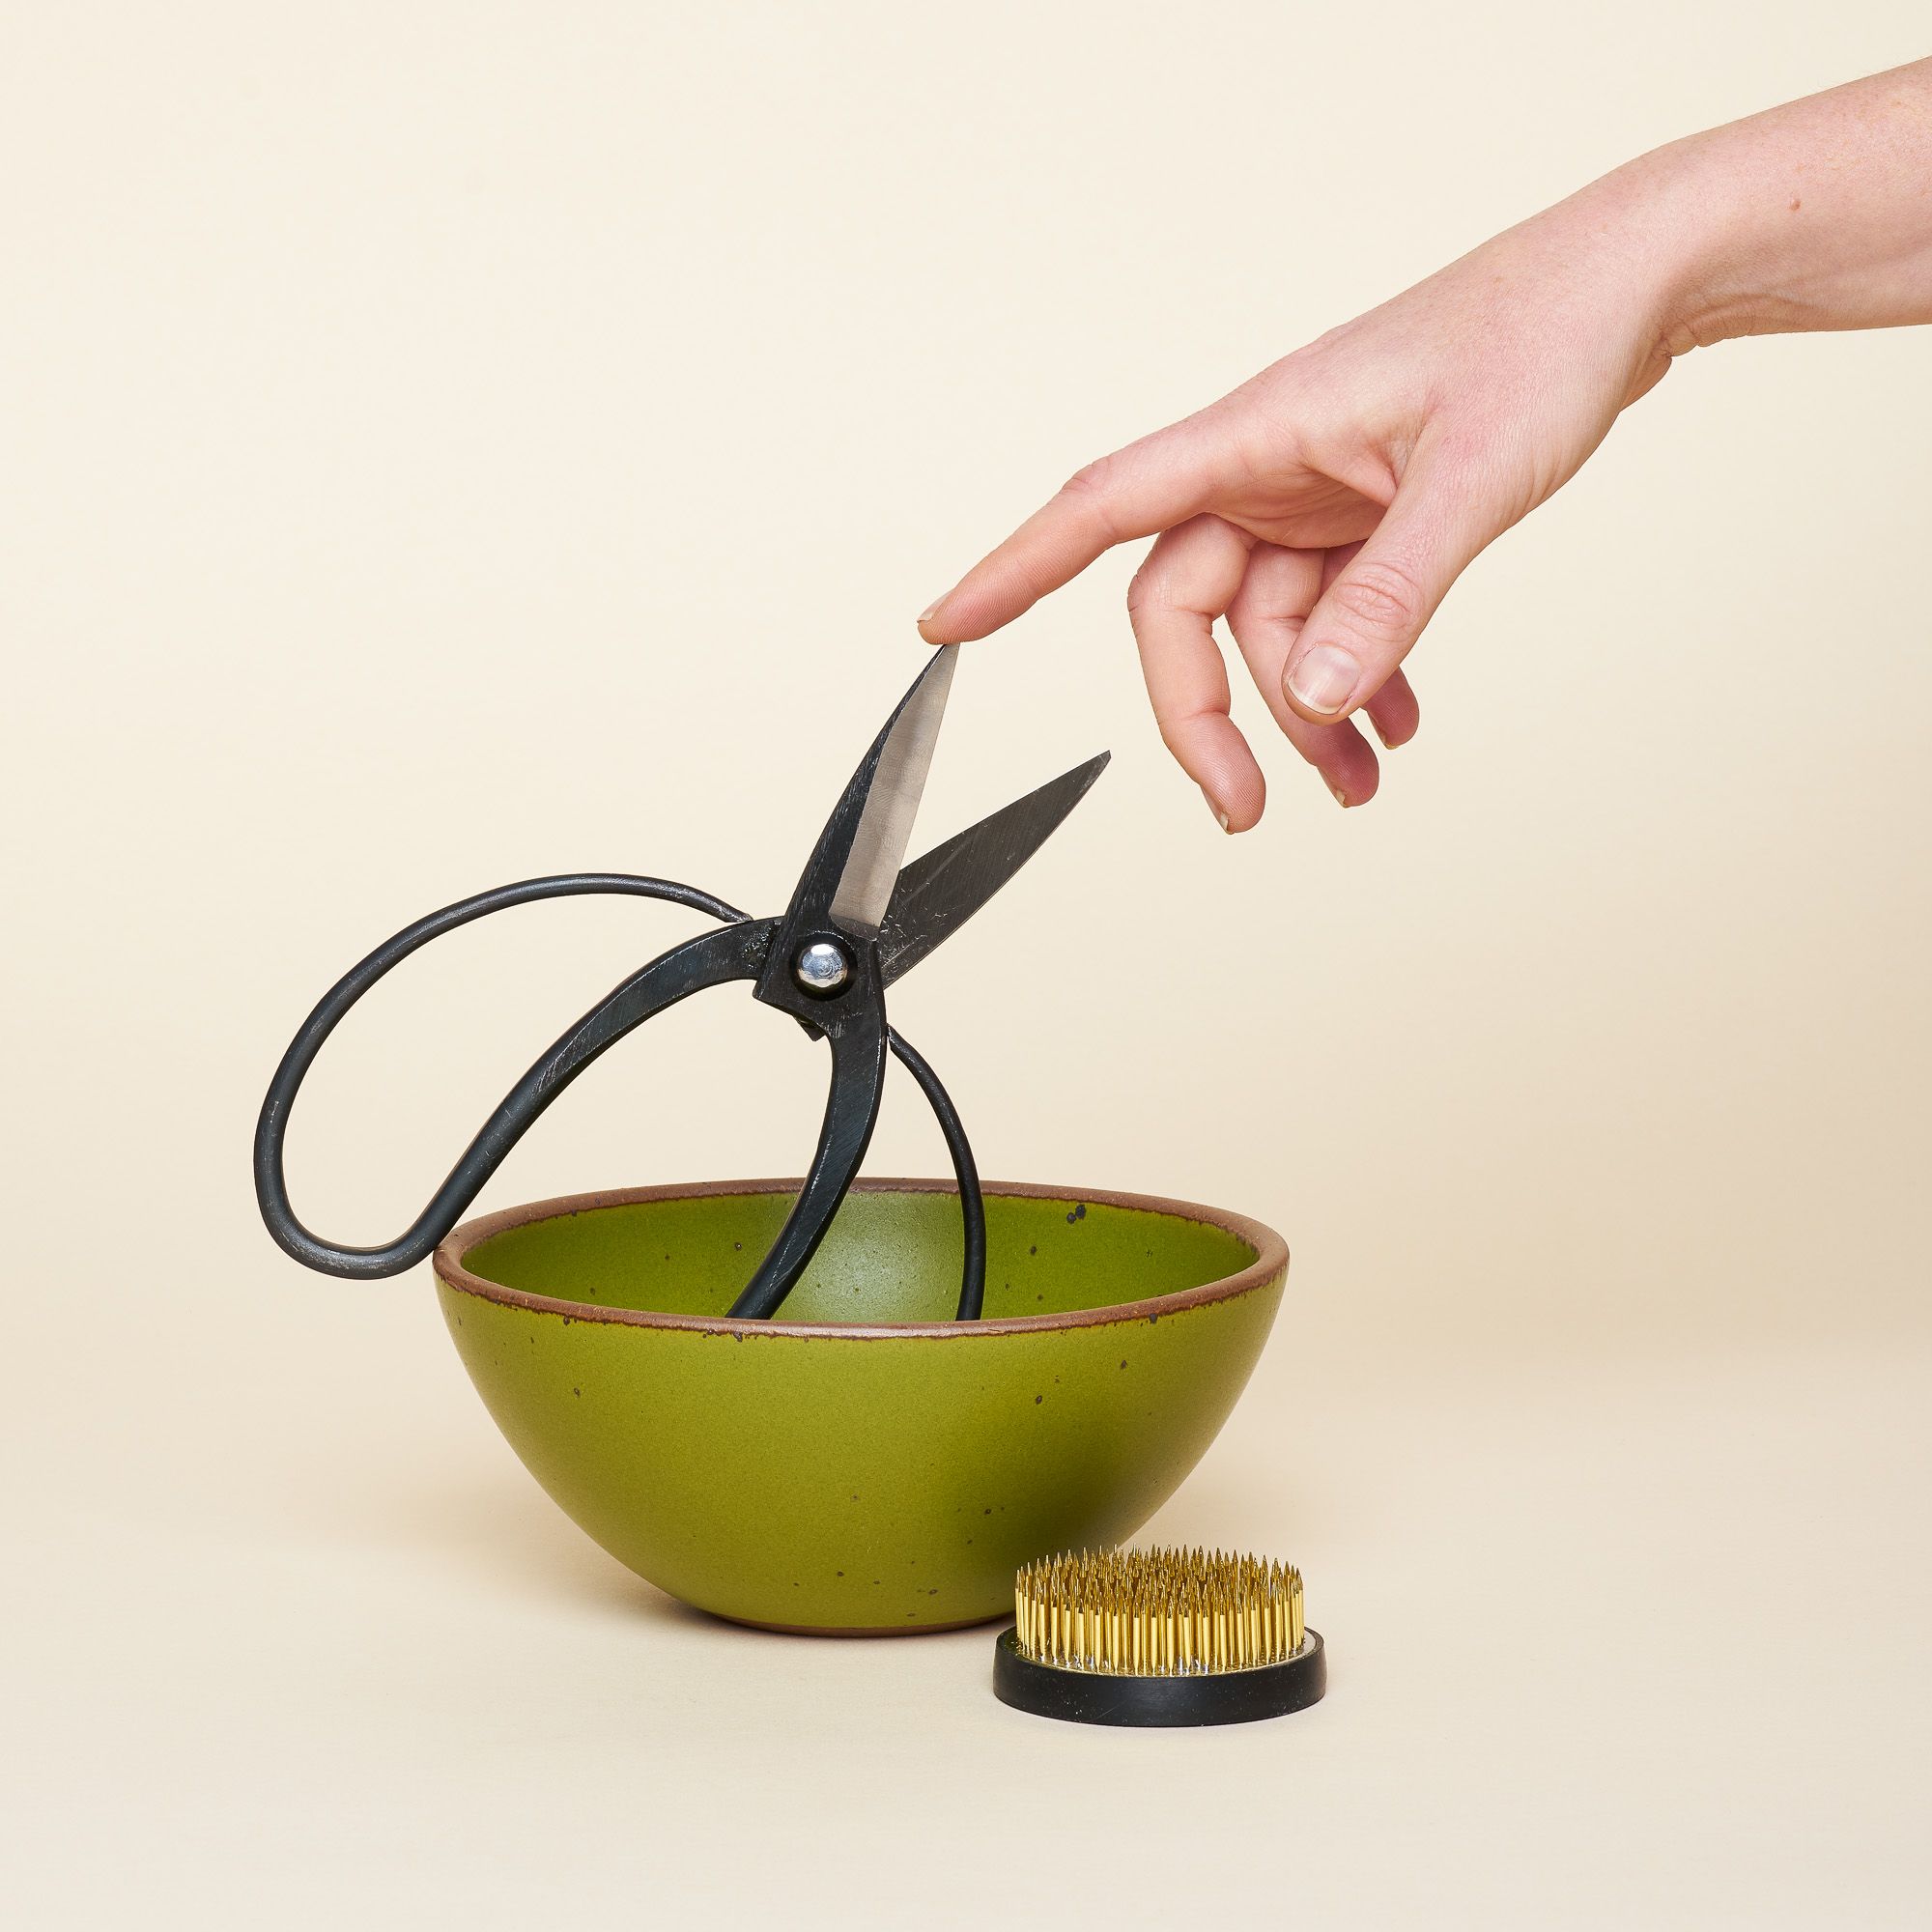 A set that comes with gardening shears, a green East Fork bowl and a "Flower Flog," a small circular dish with spikes used to construct floral arrangements and keep flowers in place. Flower frogs sit inside the floral container in the water and are traditionally known for their use in ikebana, the Japanese art of floral design.